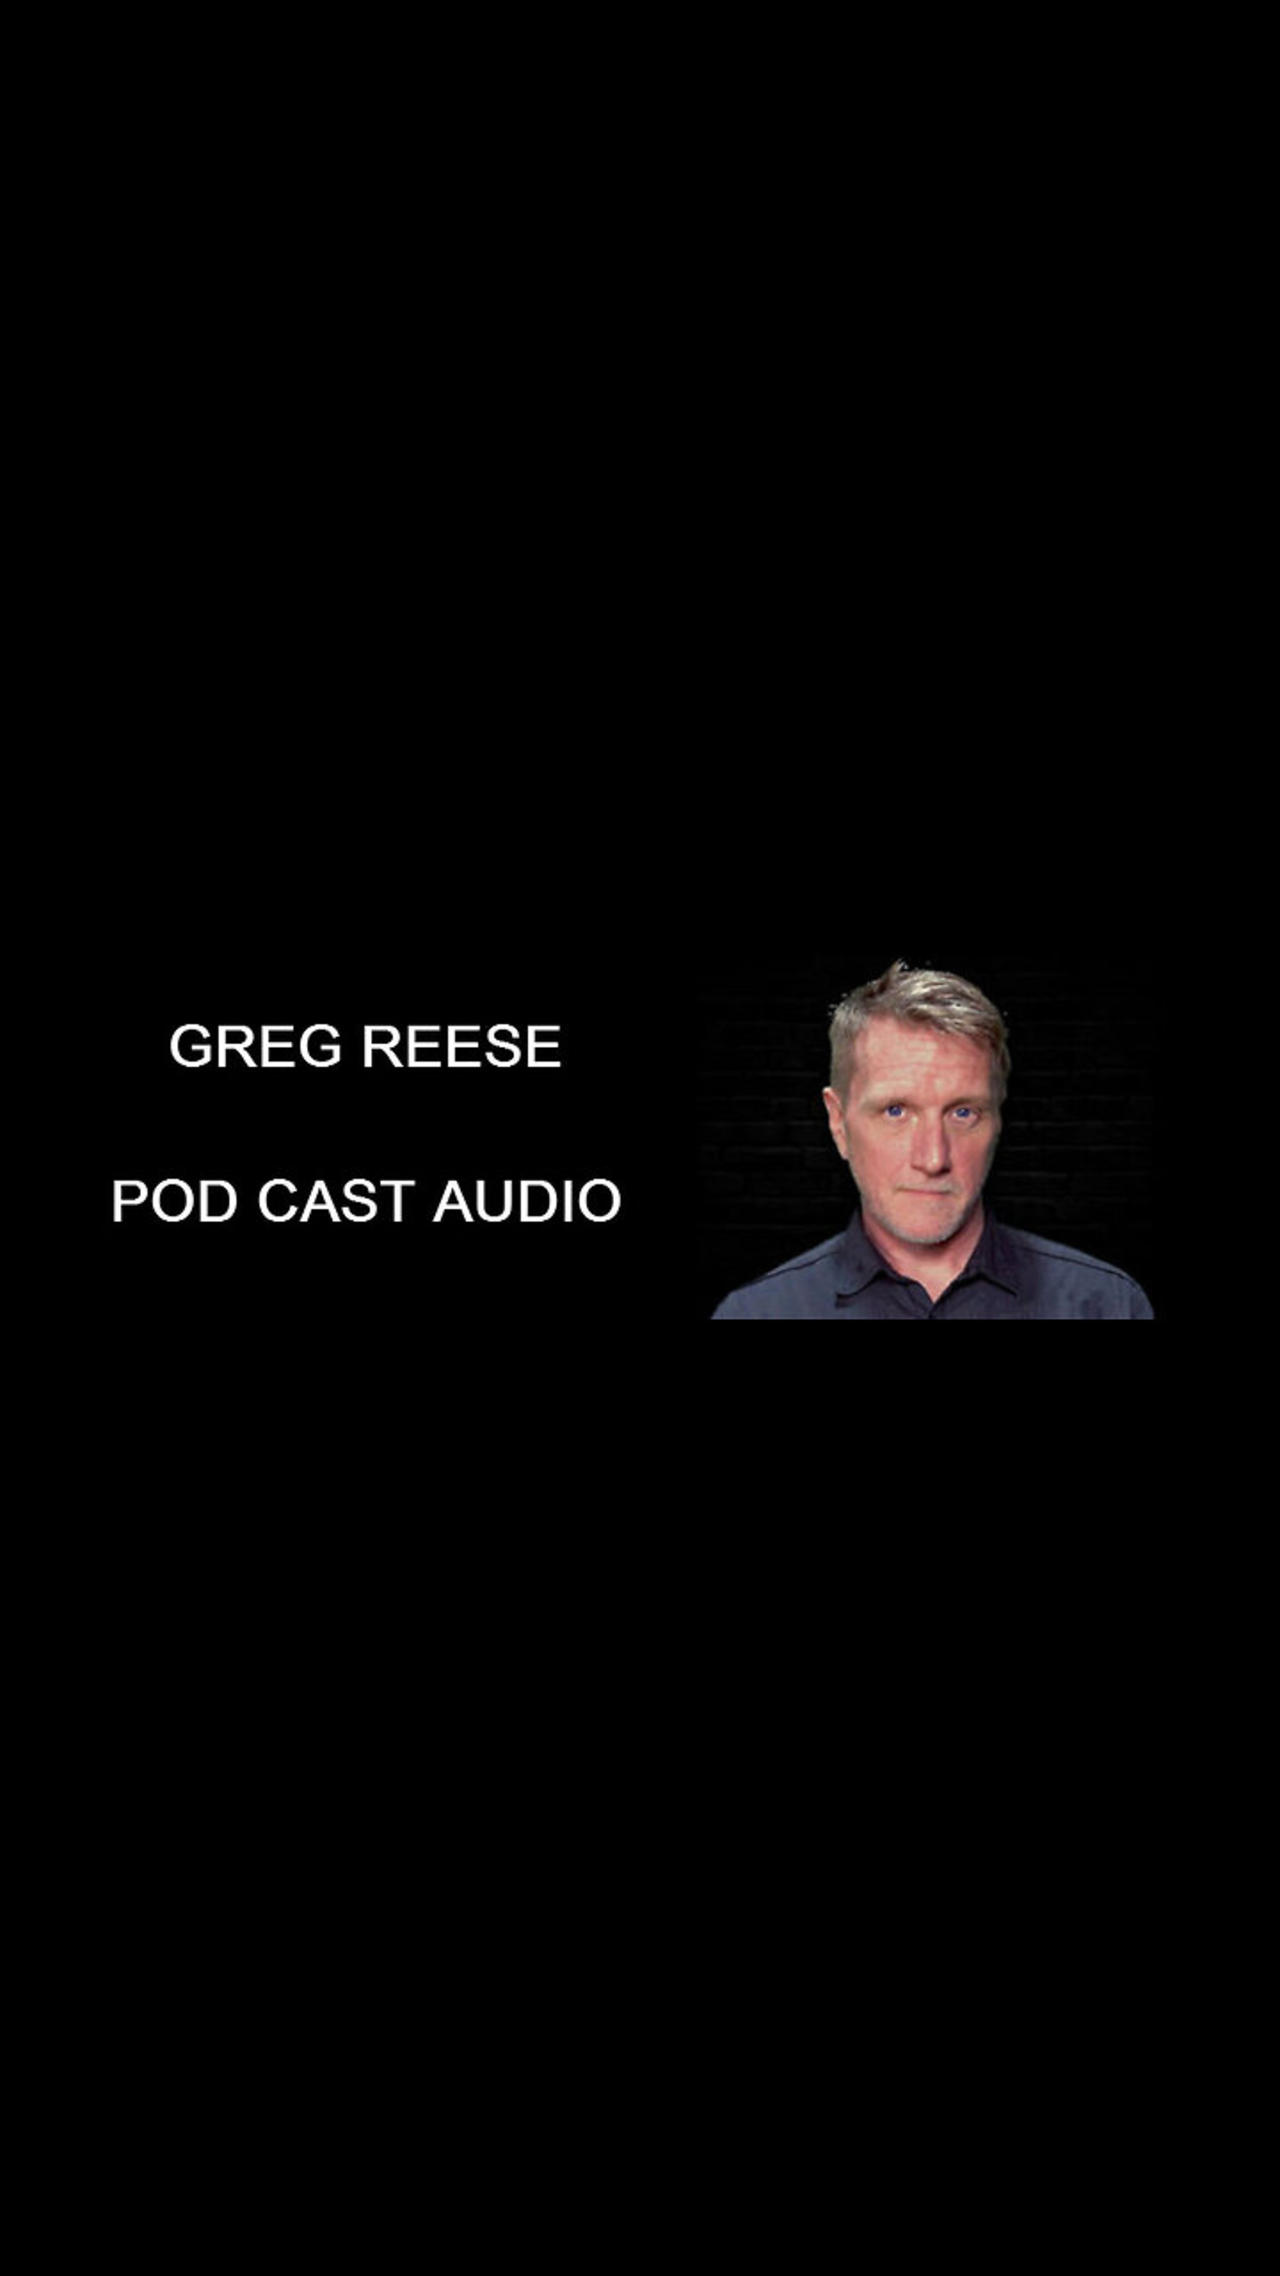 GREG REESE AUDIO - The Romanov Family with World War Now